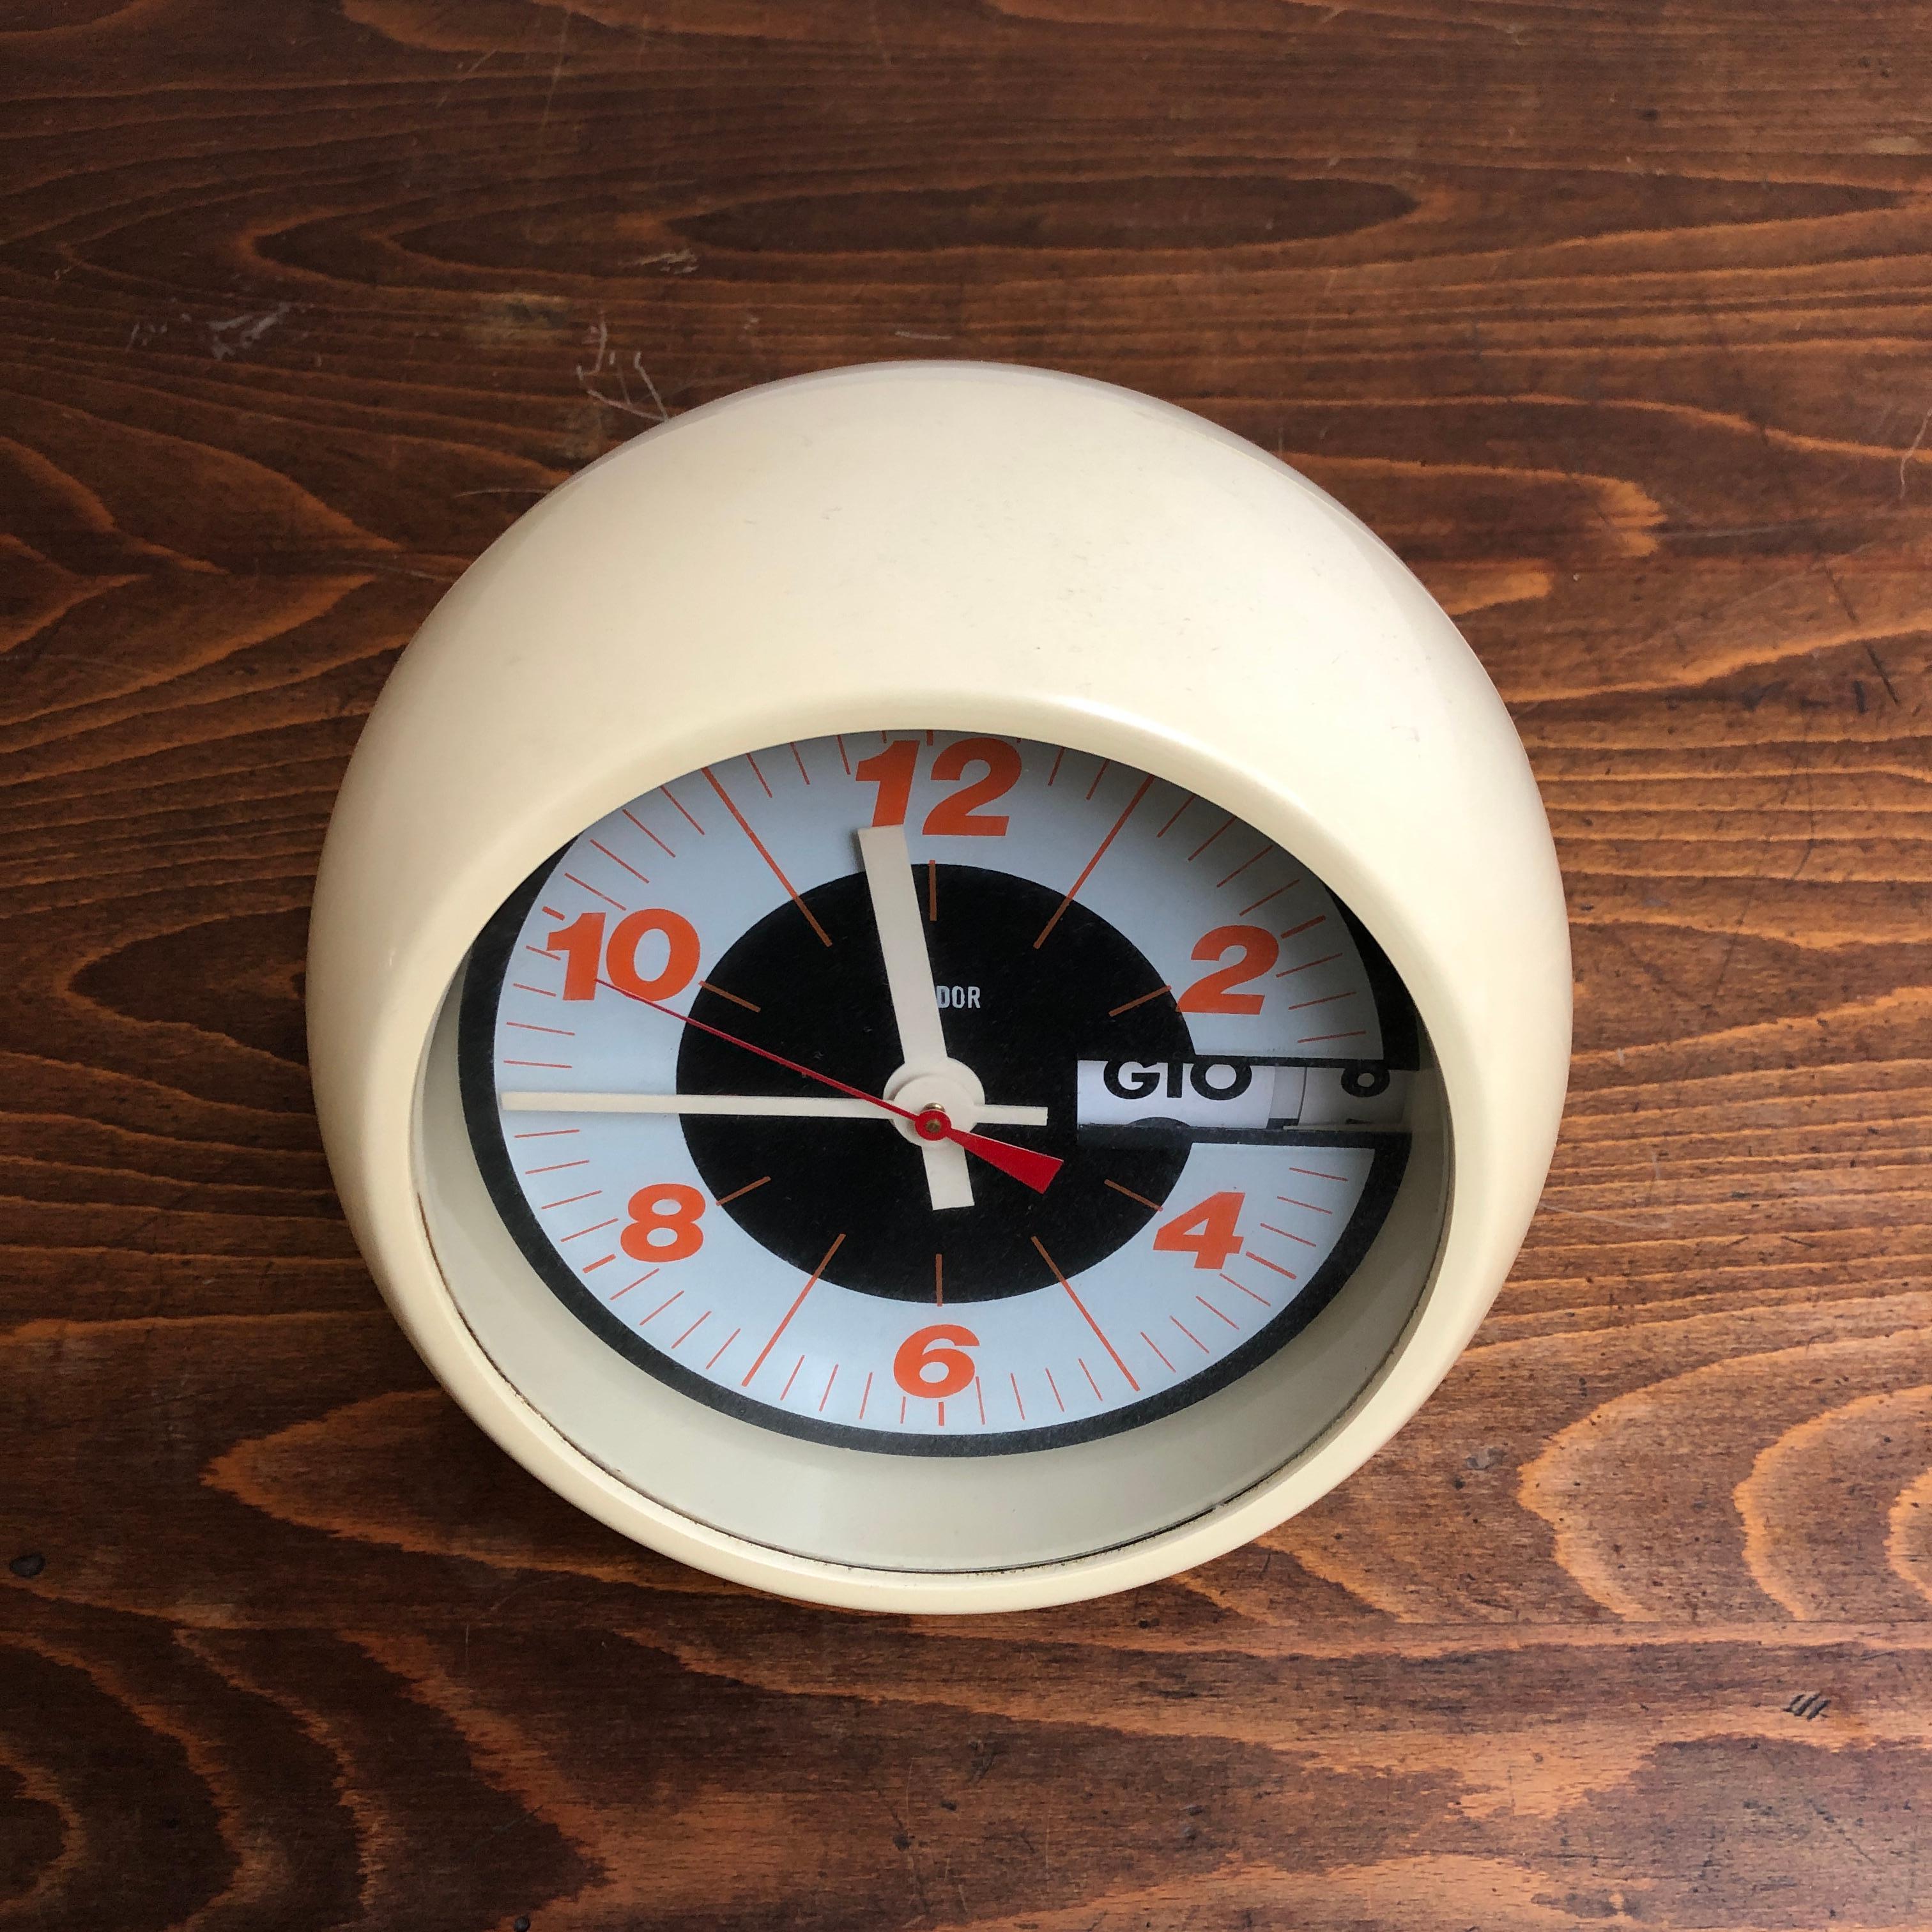 Italian plastic Space Age clock by Condor, 1970s
Plastic Space Age clock with quartz movement
Produced by Condor, 1970s
Perfect conditions.